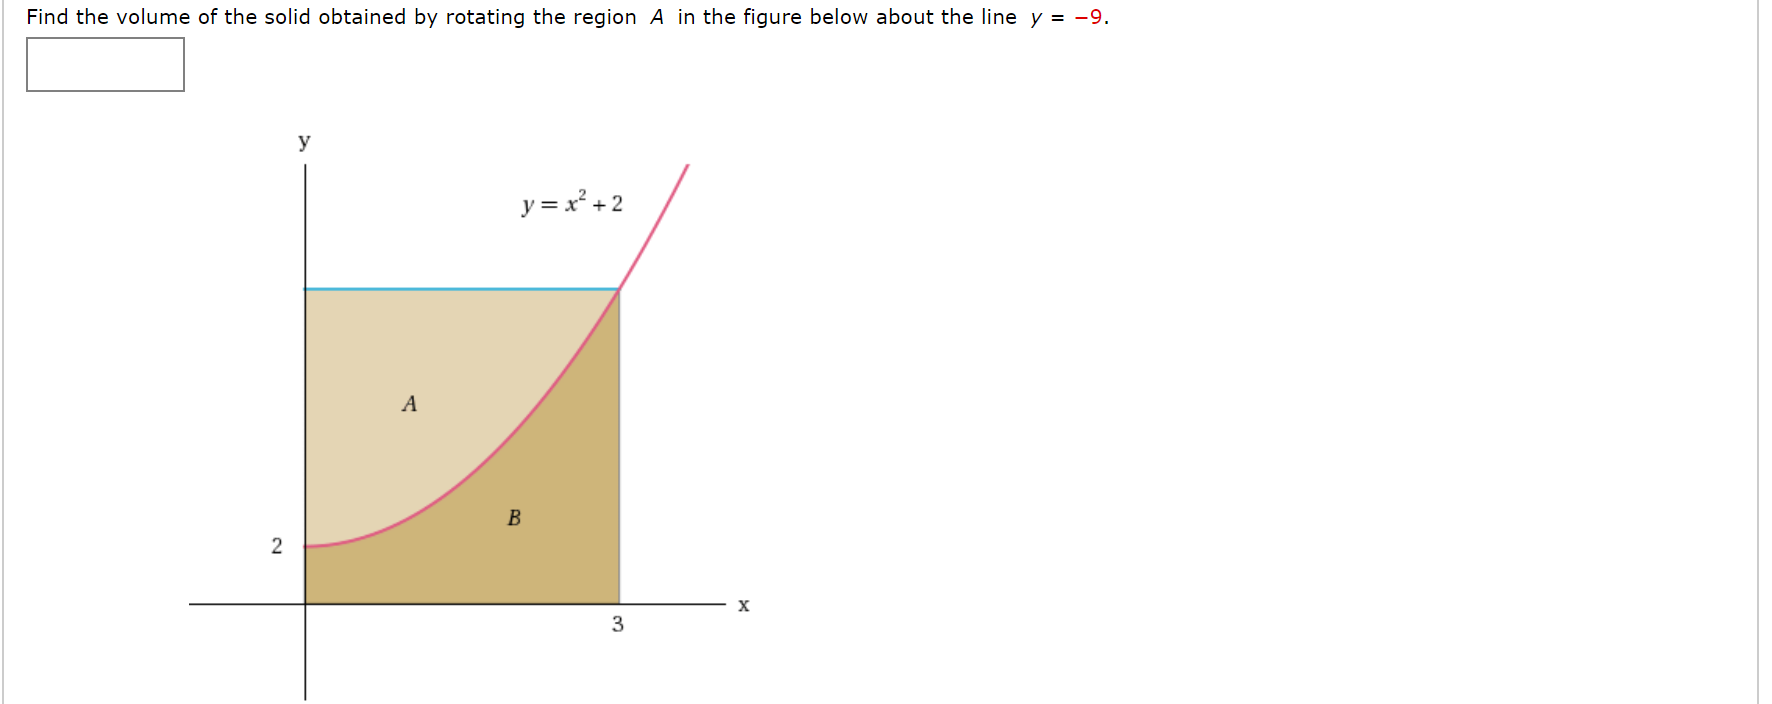 Find the volume of the solid obtained by rotating the region A in the figure below about the line y = -9.
y
y = x² + 2
A
B
